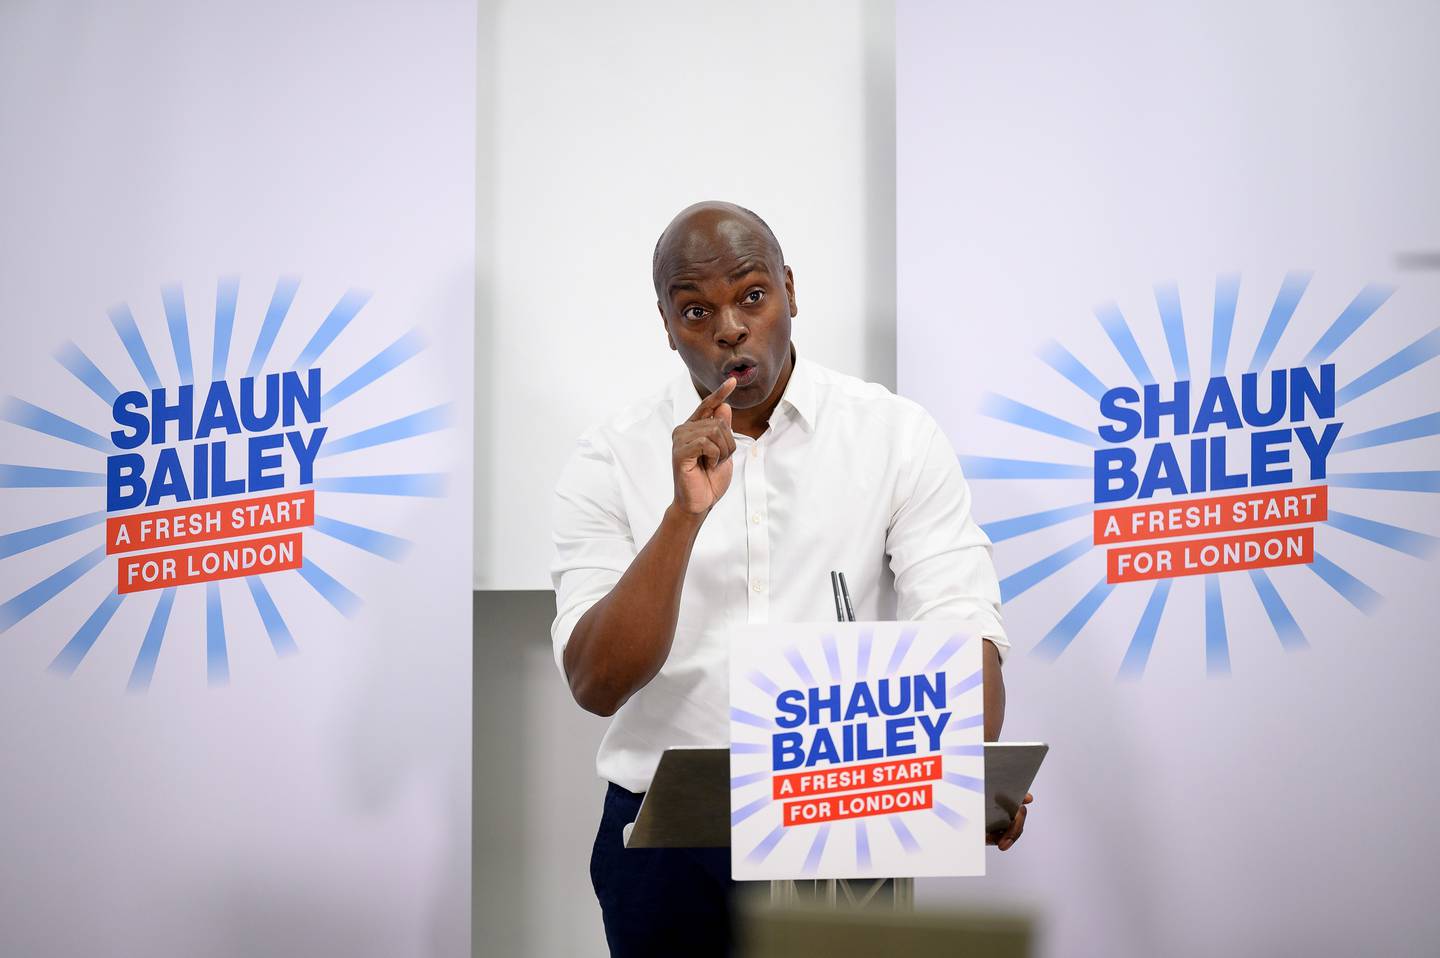 Shaun Bailey makes an online speech during his campaign to become London mayor. Getty Images